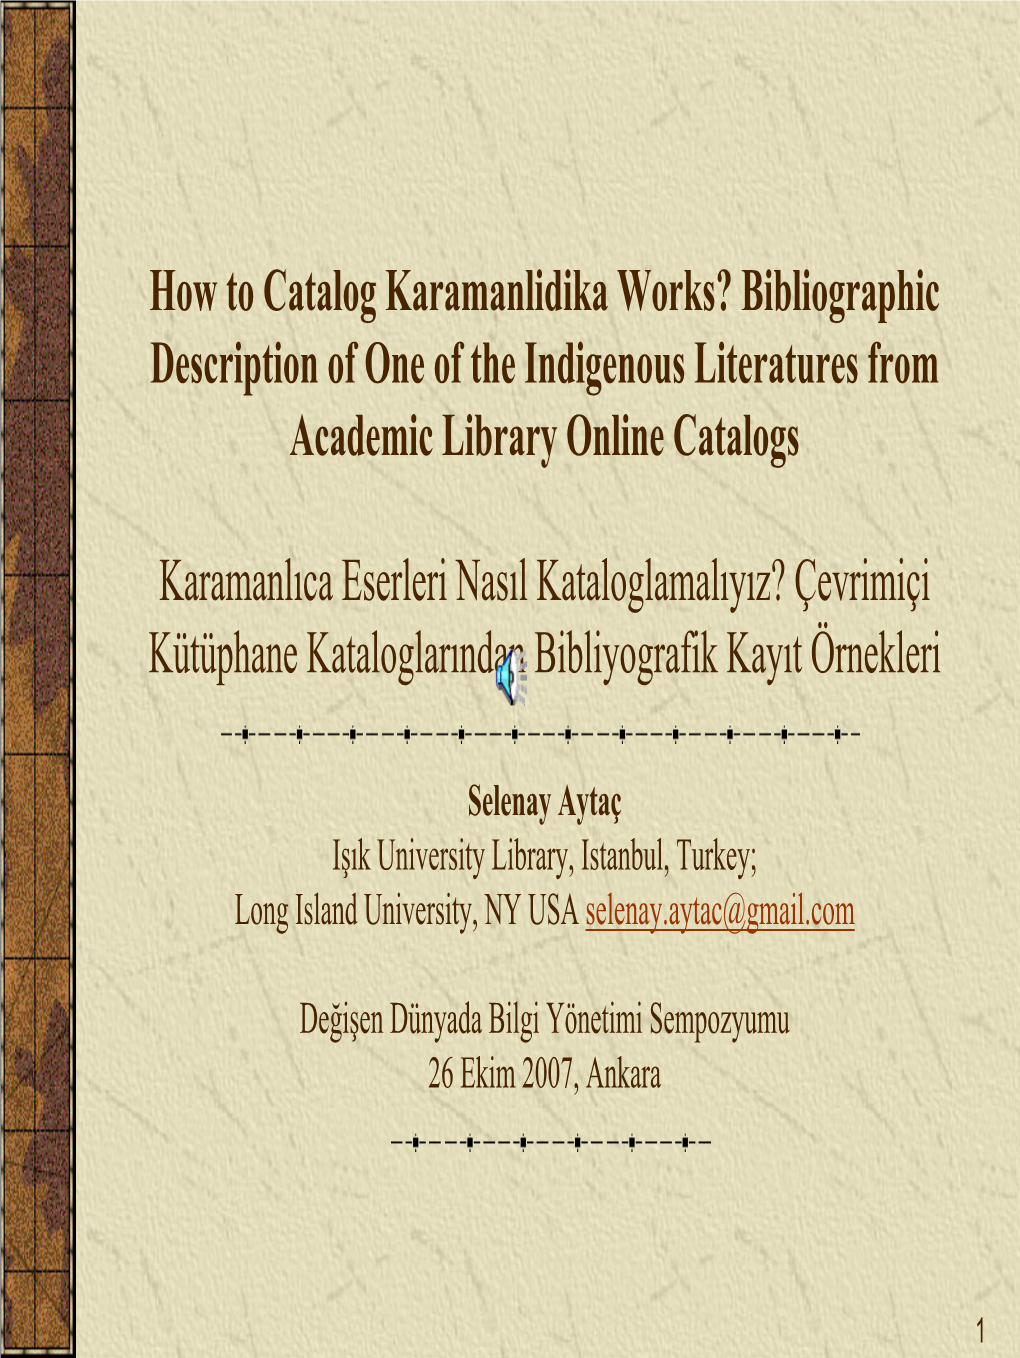 How to Catalog Karamanlidika Works? Bibliographic Description of One of the Indigenous Literatures from Academic Library Online Catalogs